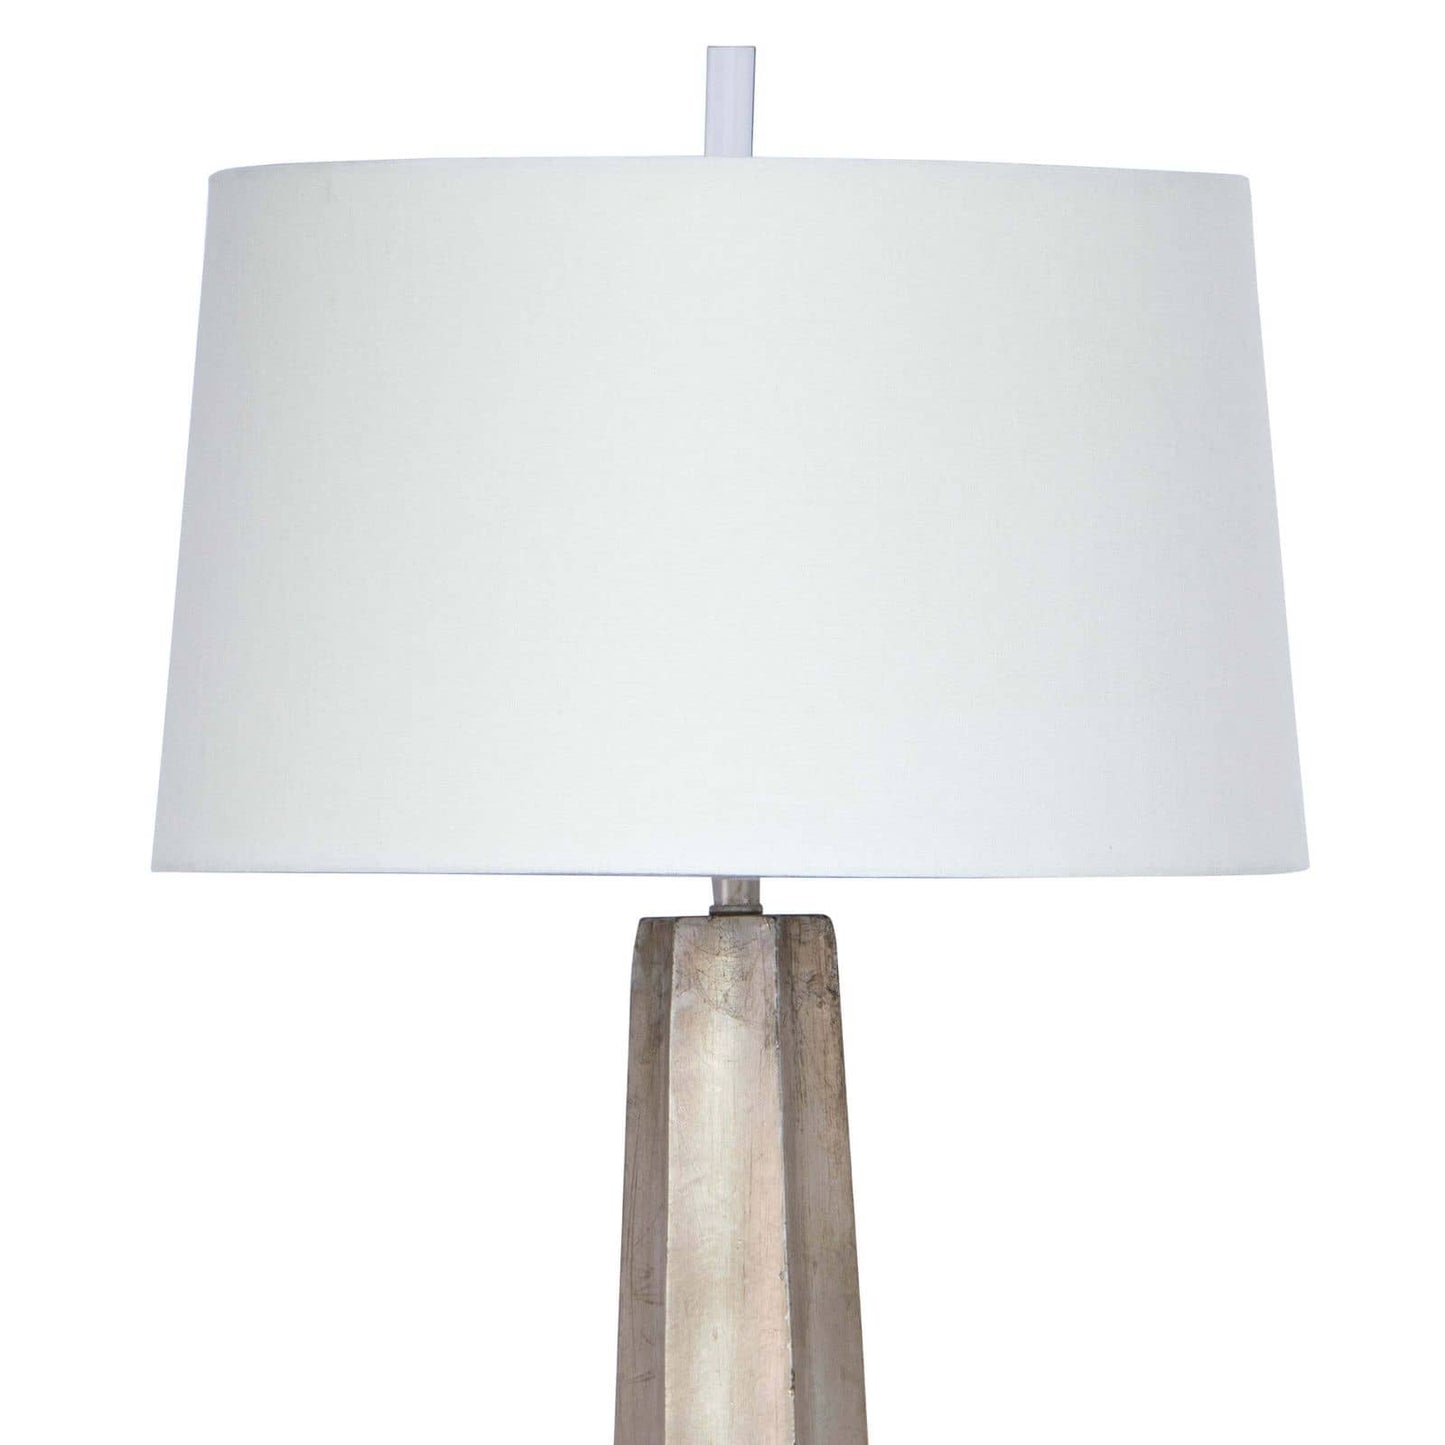 Celine Table Lamp in Ambered Silver Leaf by Regina Andrew